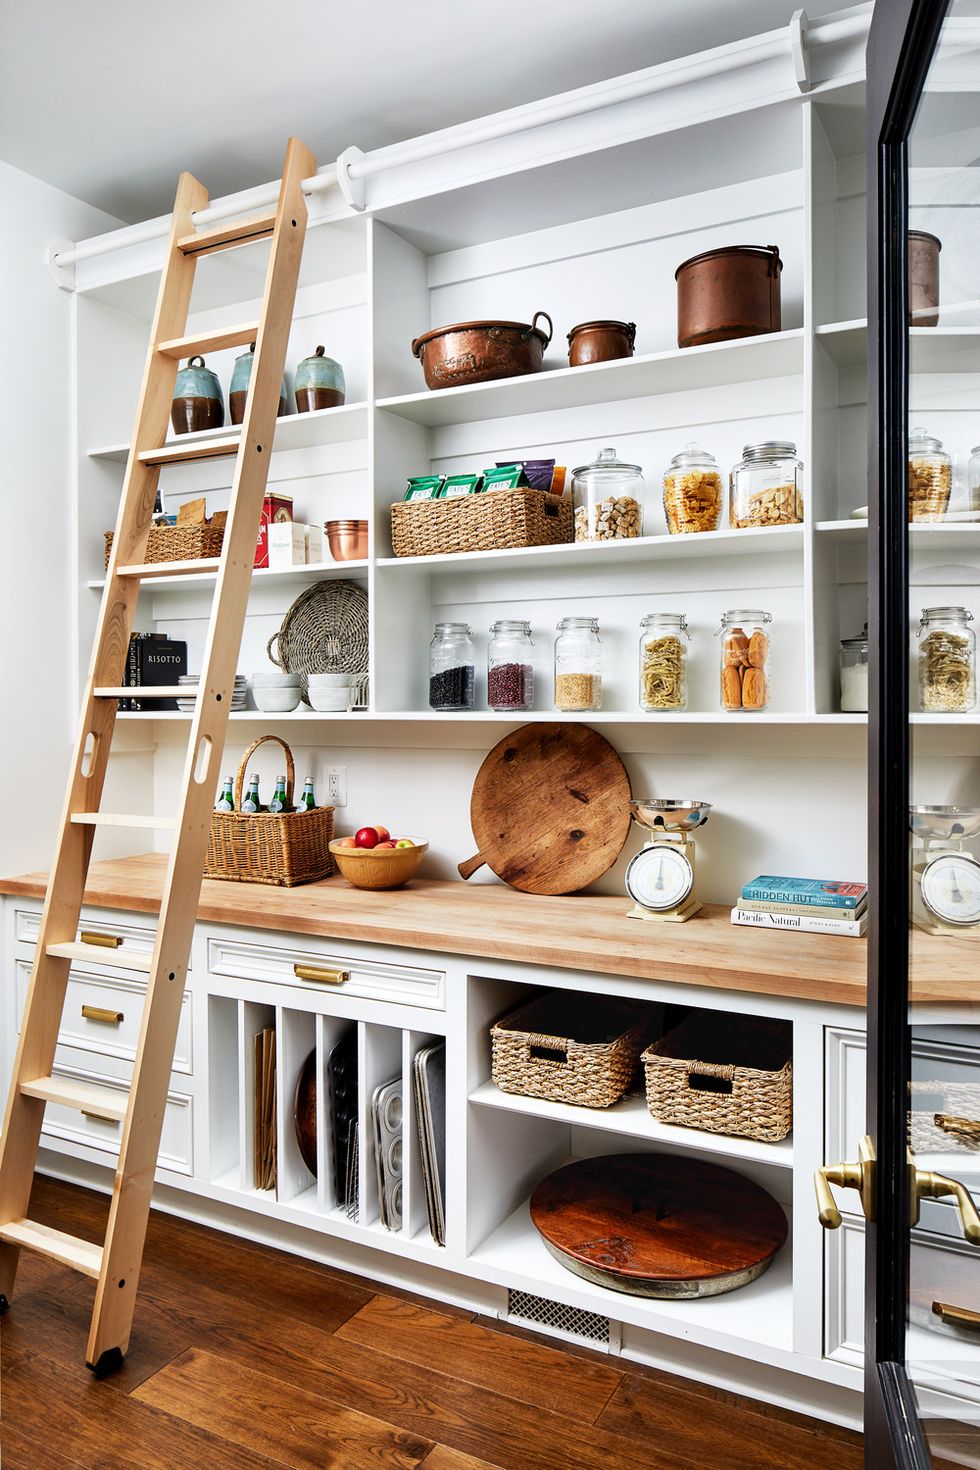 18 kitchen storage and organization ideas for 2023, per experts